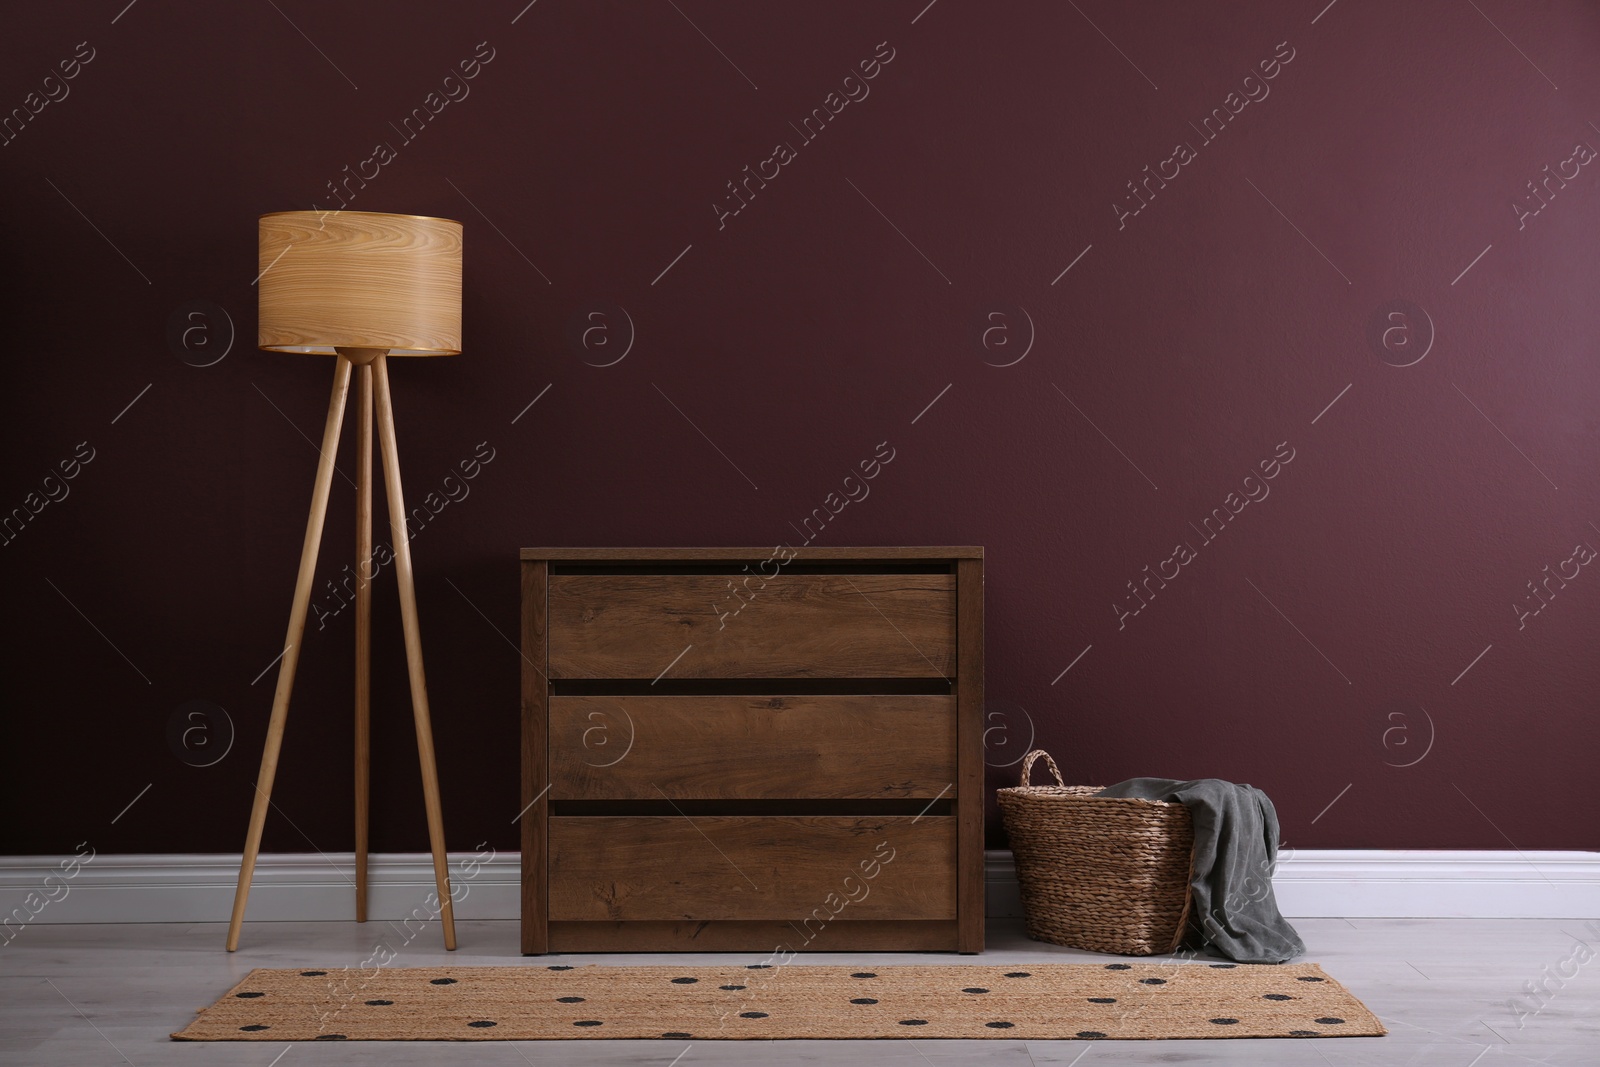 Photo of Elegant room interior with stylish chest of drawers, floor lamp and wicker basket